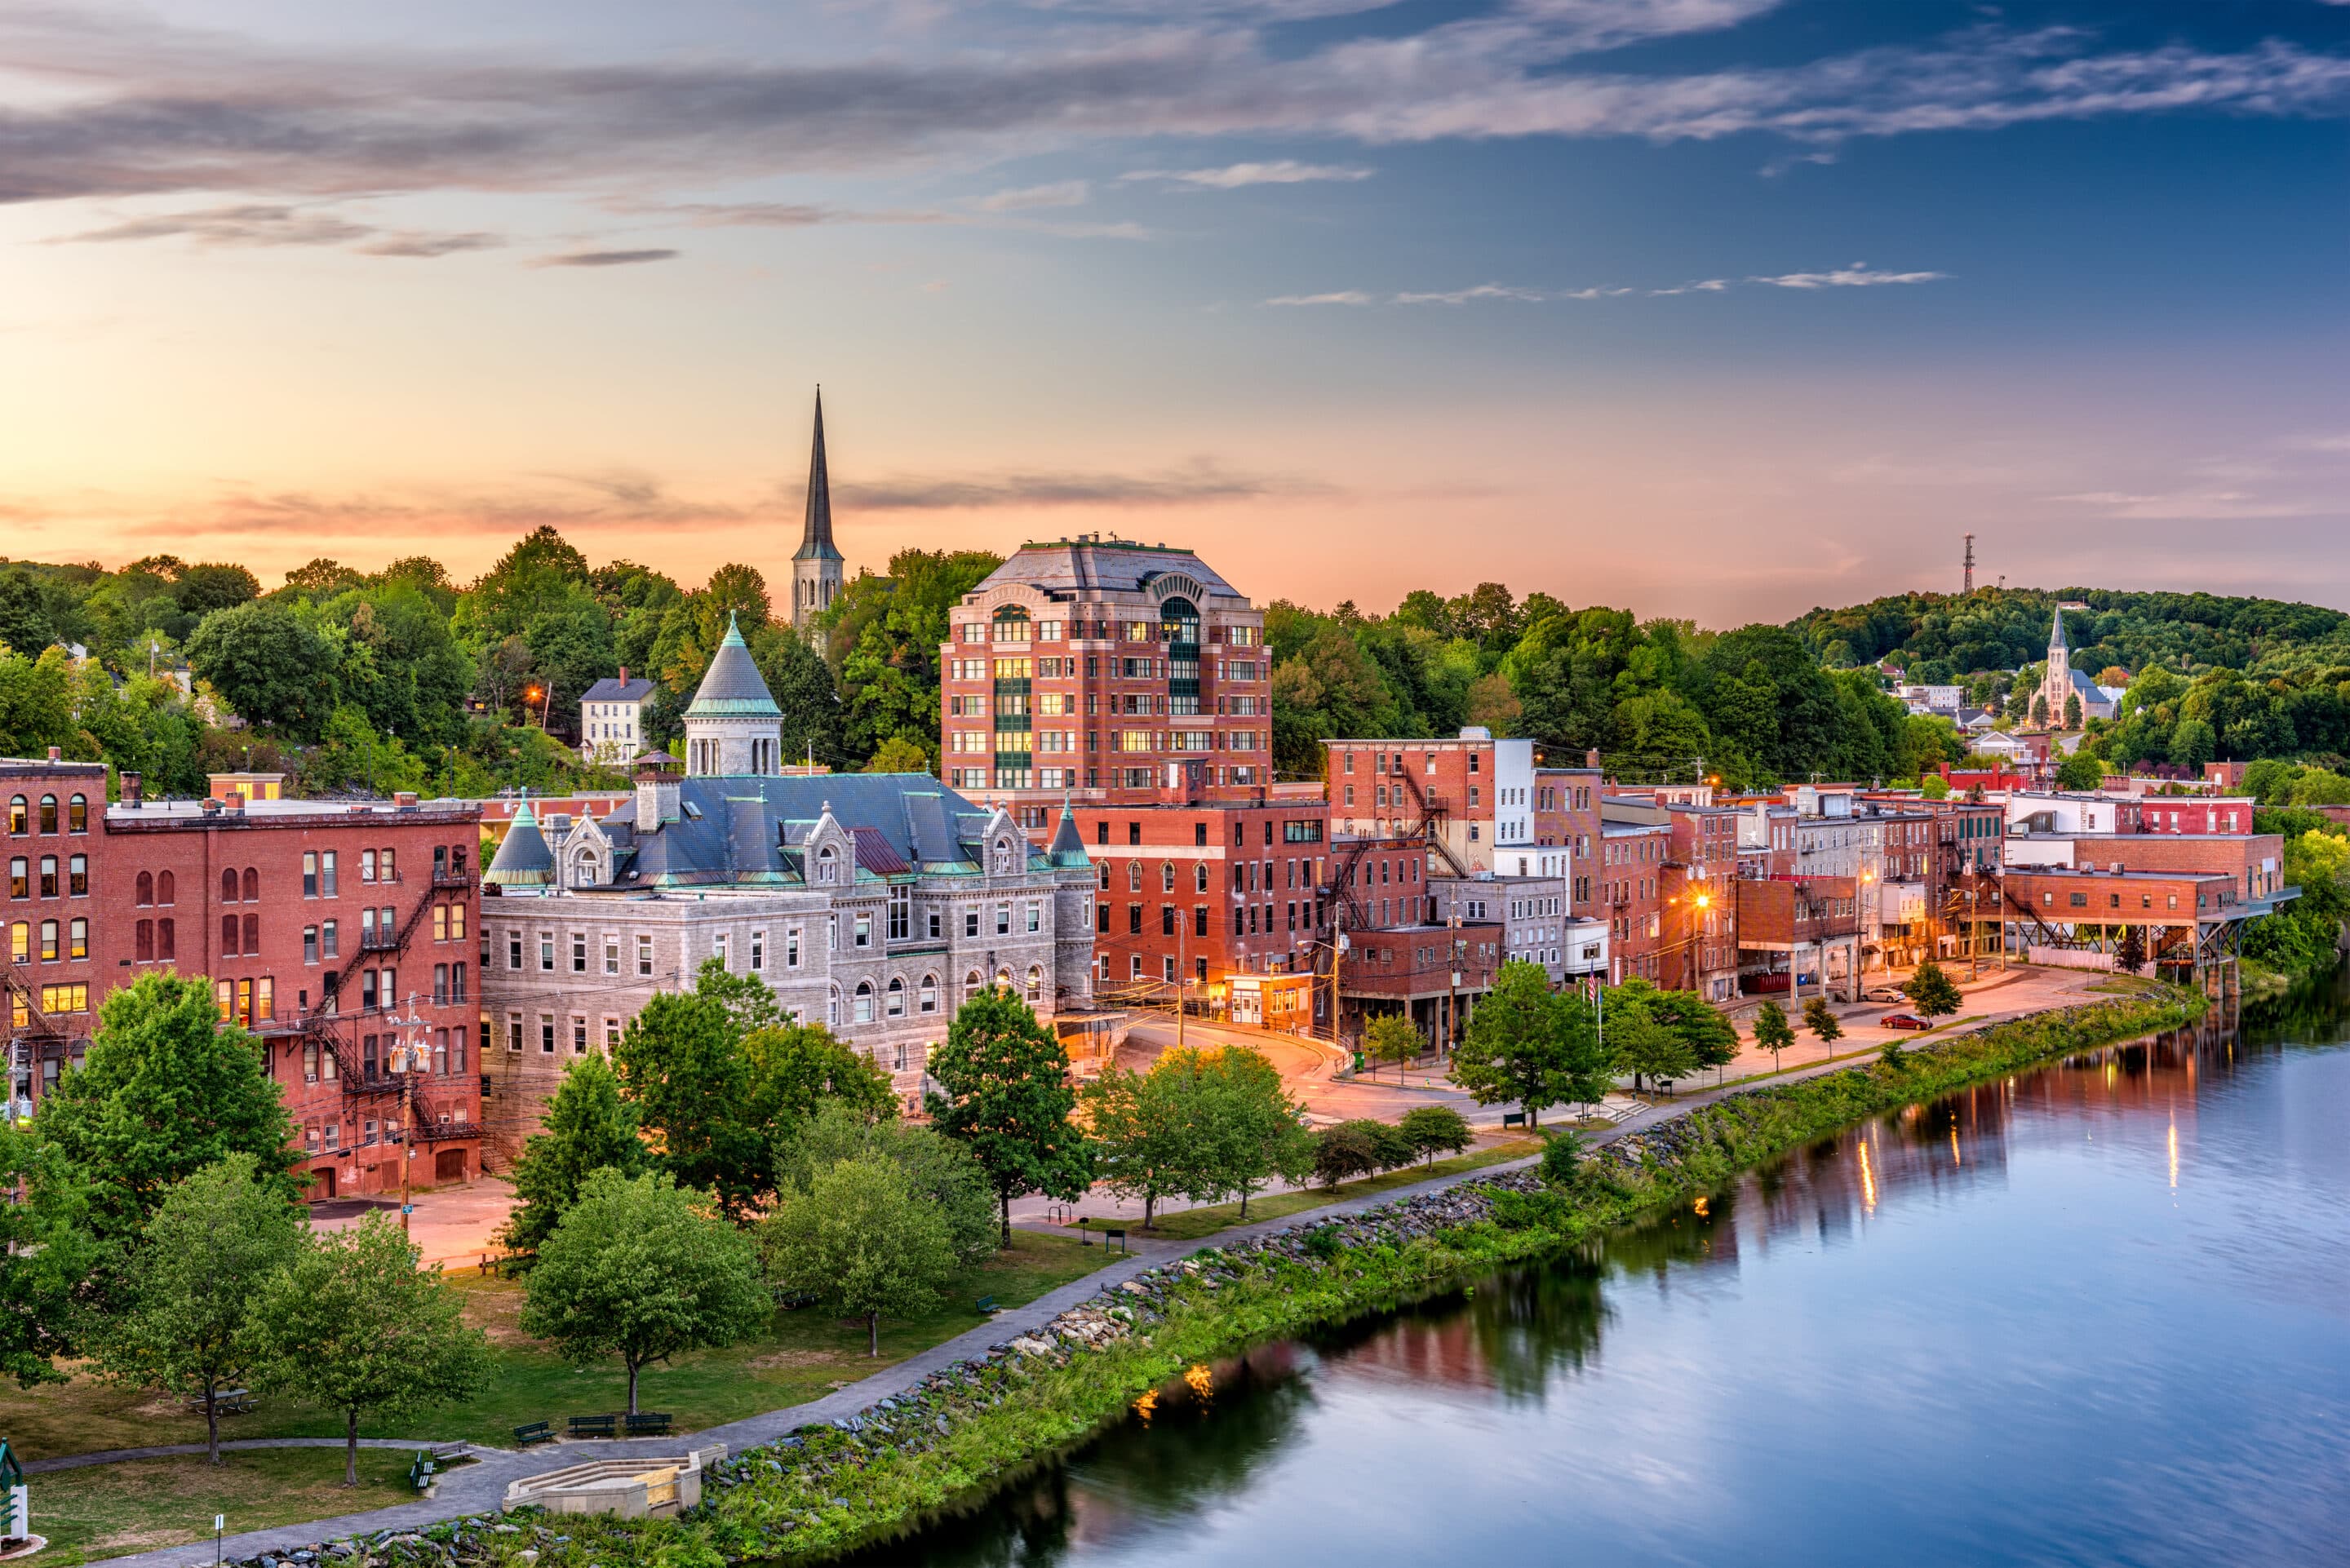 A Maine riverside town at dusk, reflecting the importance of Maine flood insurance against the backdrop of historic buildings and a gentle river, with lights beginning to twinkle in the evening tranquility.